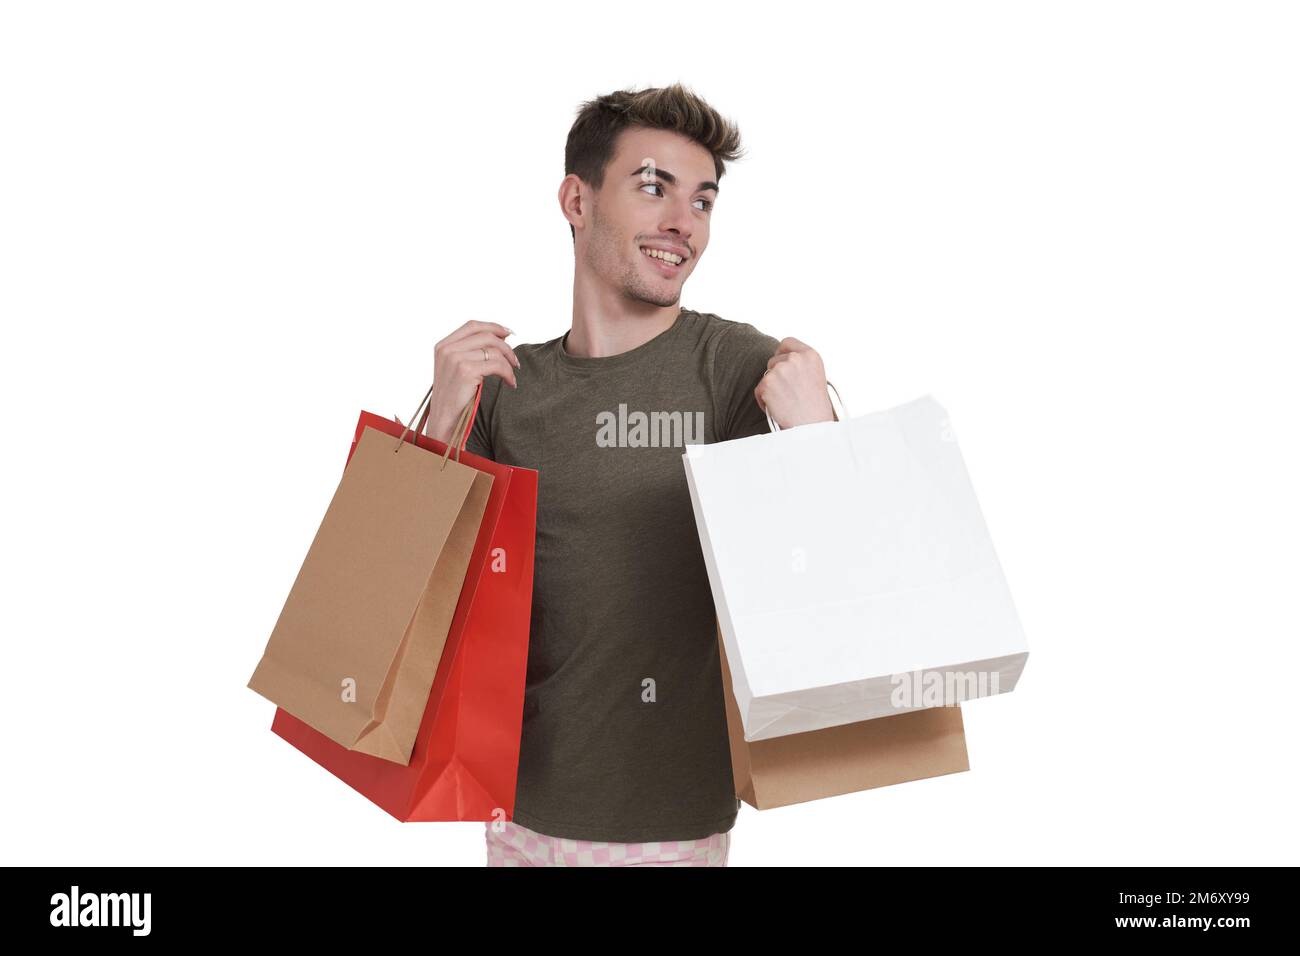 Young caucasian man smiling and holding shopping bags, isolated. Stock Photo